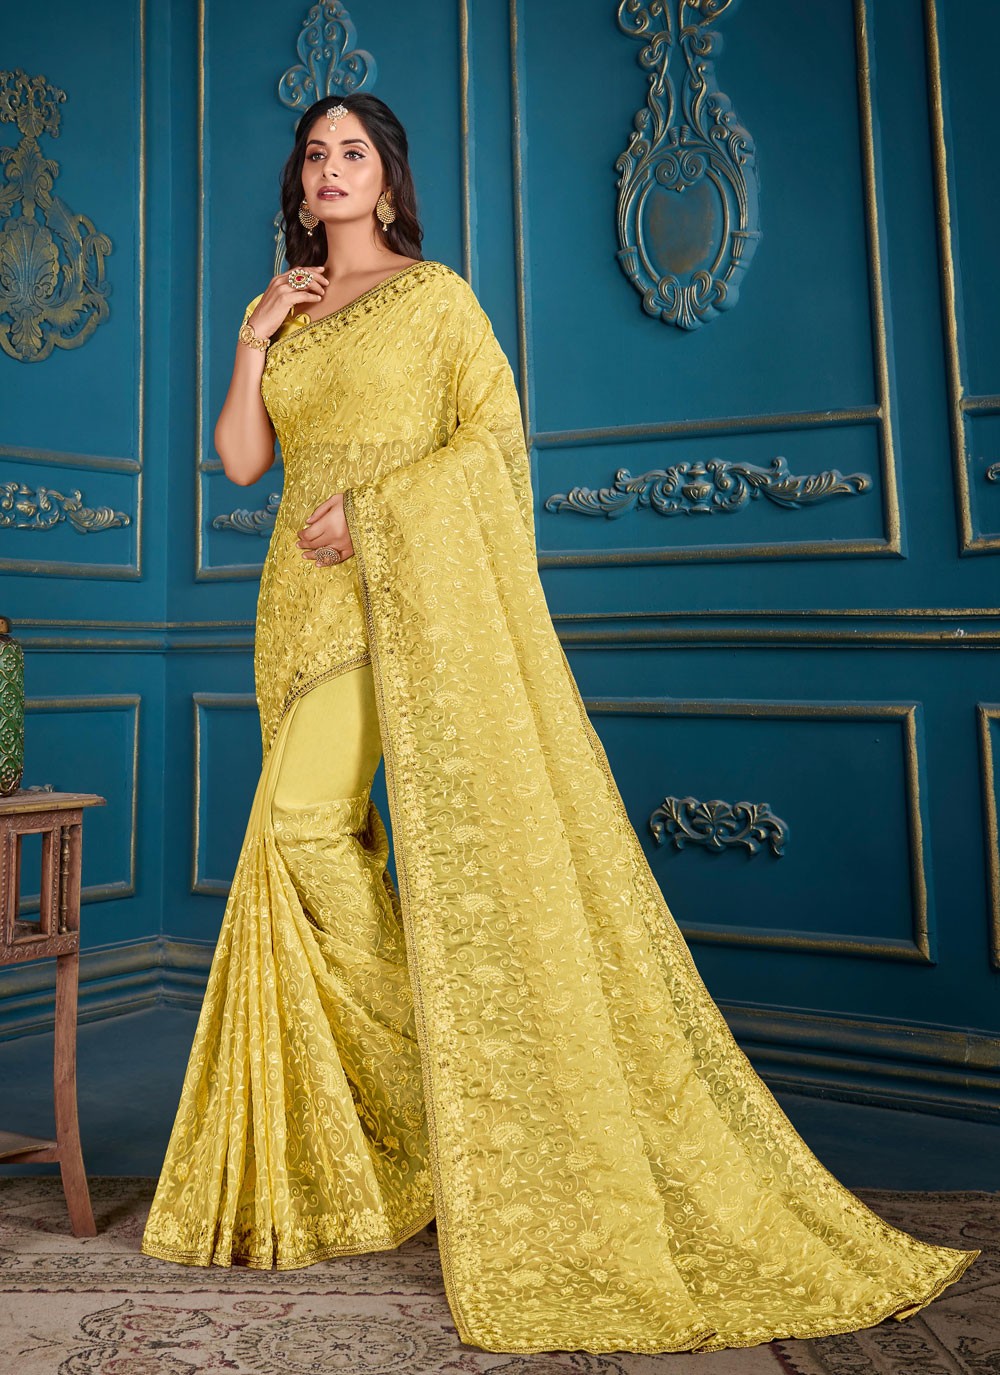 Golden Sheen: The Ethereal Charm of a Glowy Double Zari Yellow Saree – YNF